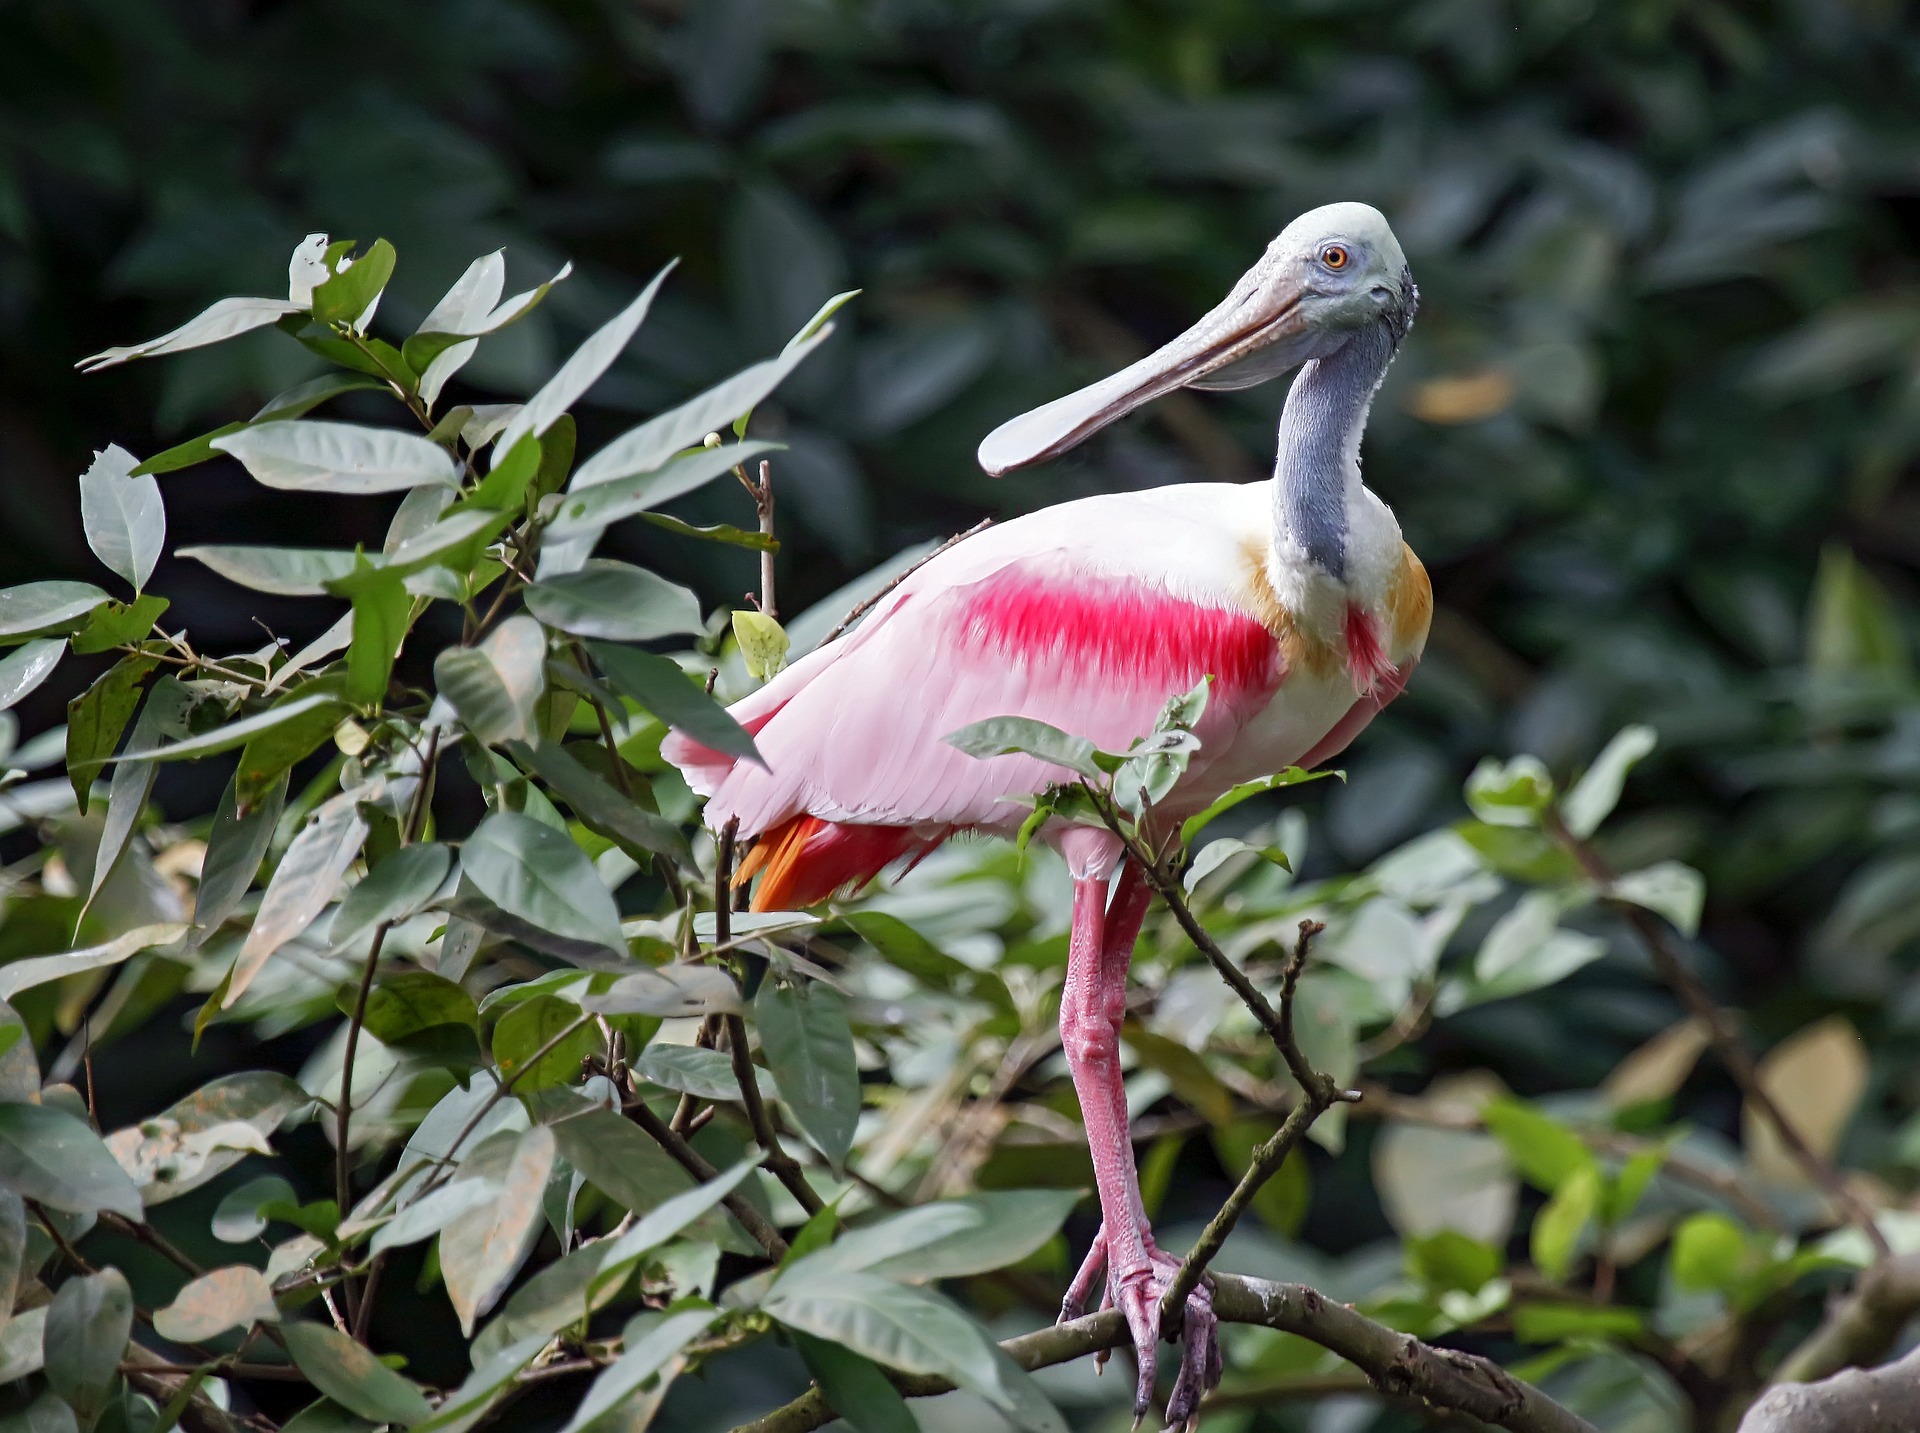 A pink bird perched in shrubbery